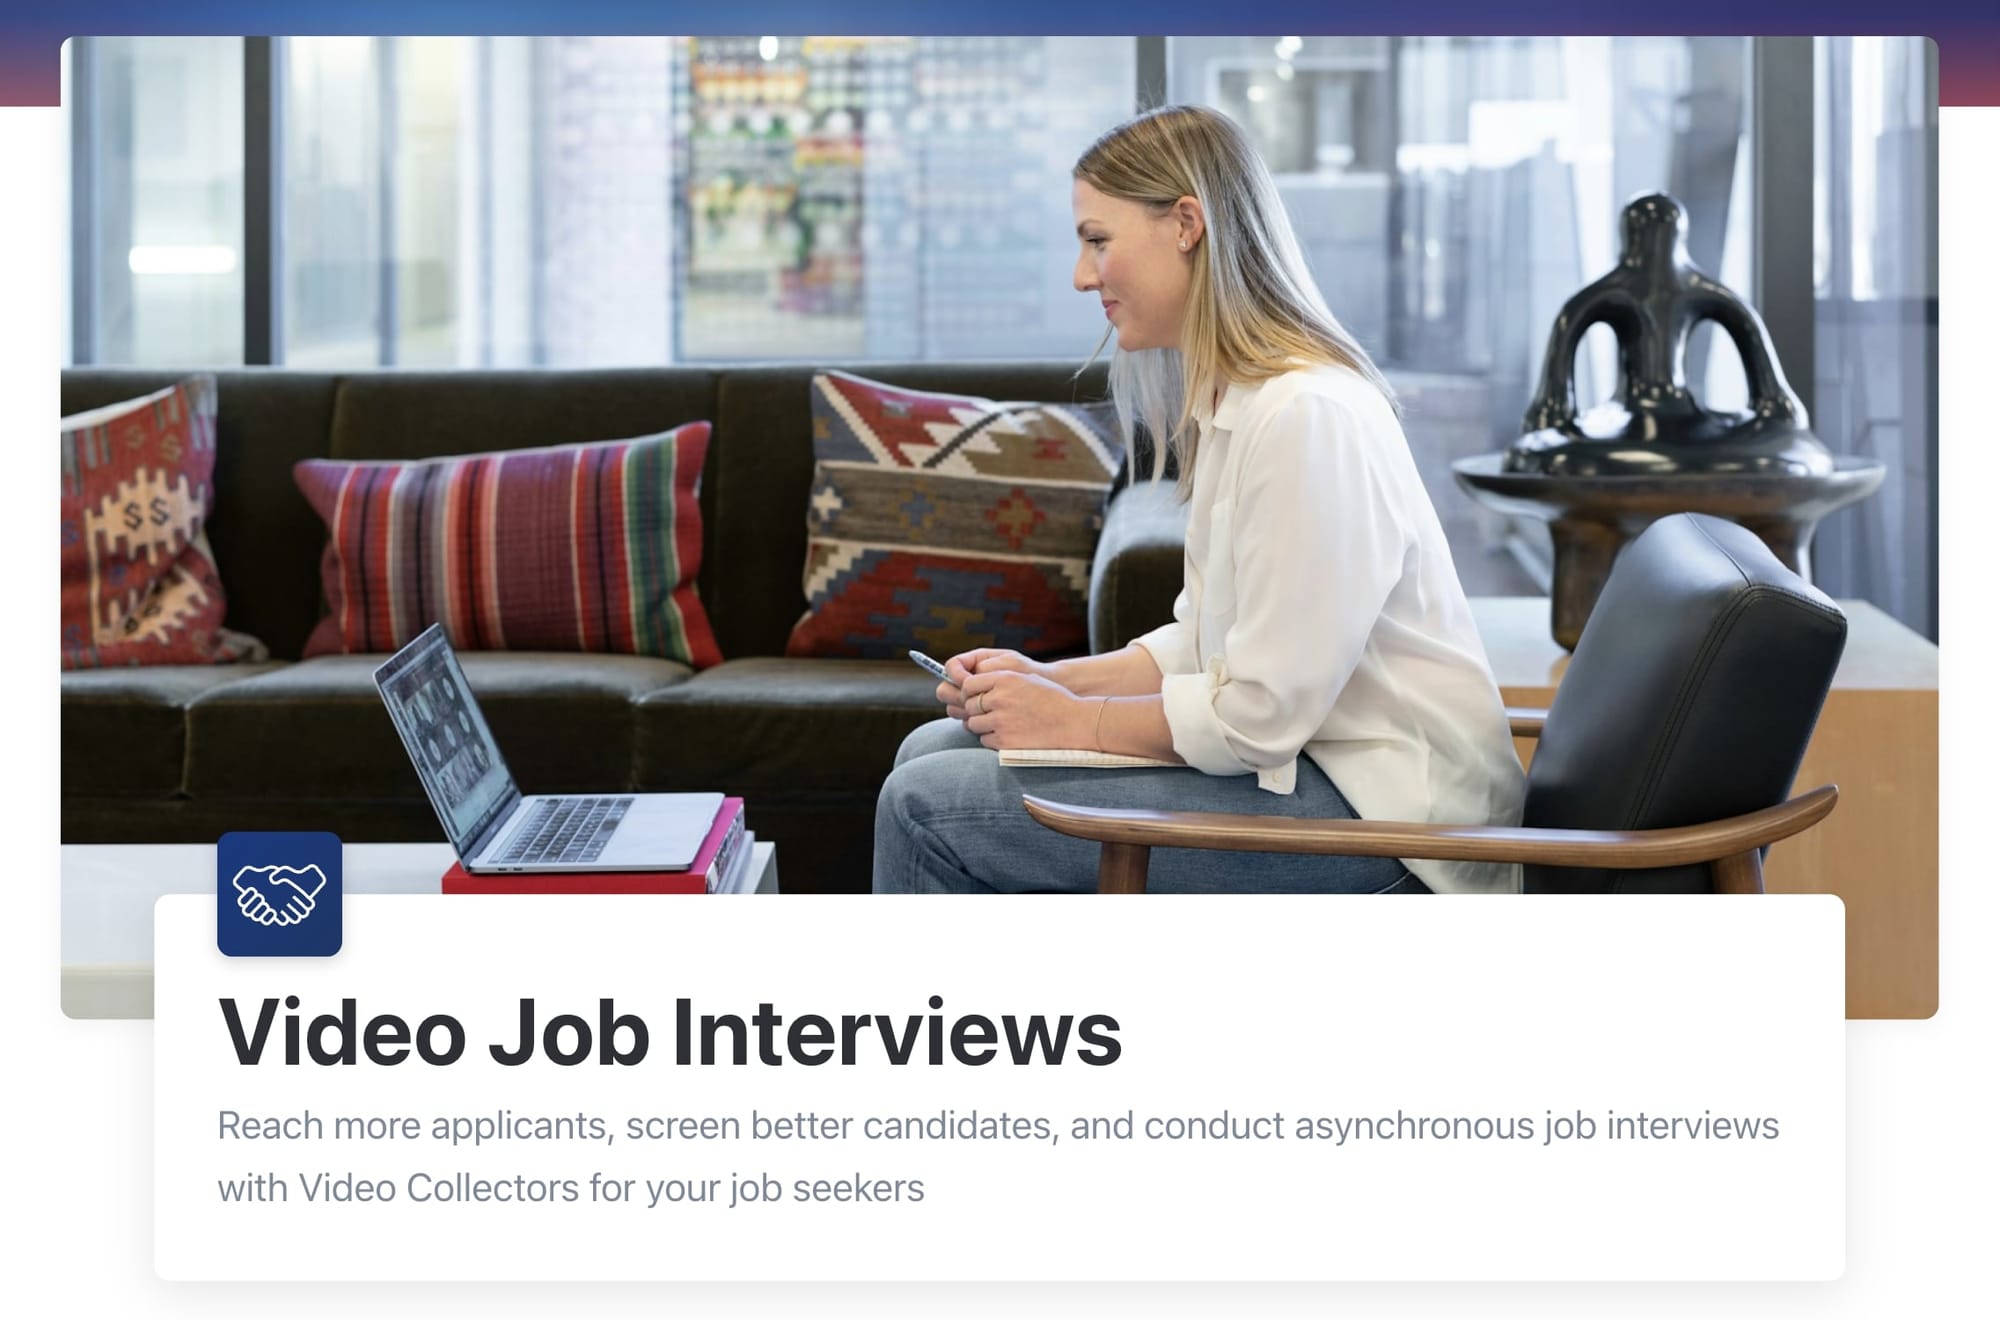 Video Job Interviews: Reach more applicants, screen better candidates, and conduct asynchronous job interviews with Video Collectors for your job seekers